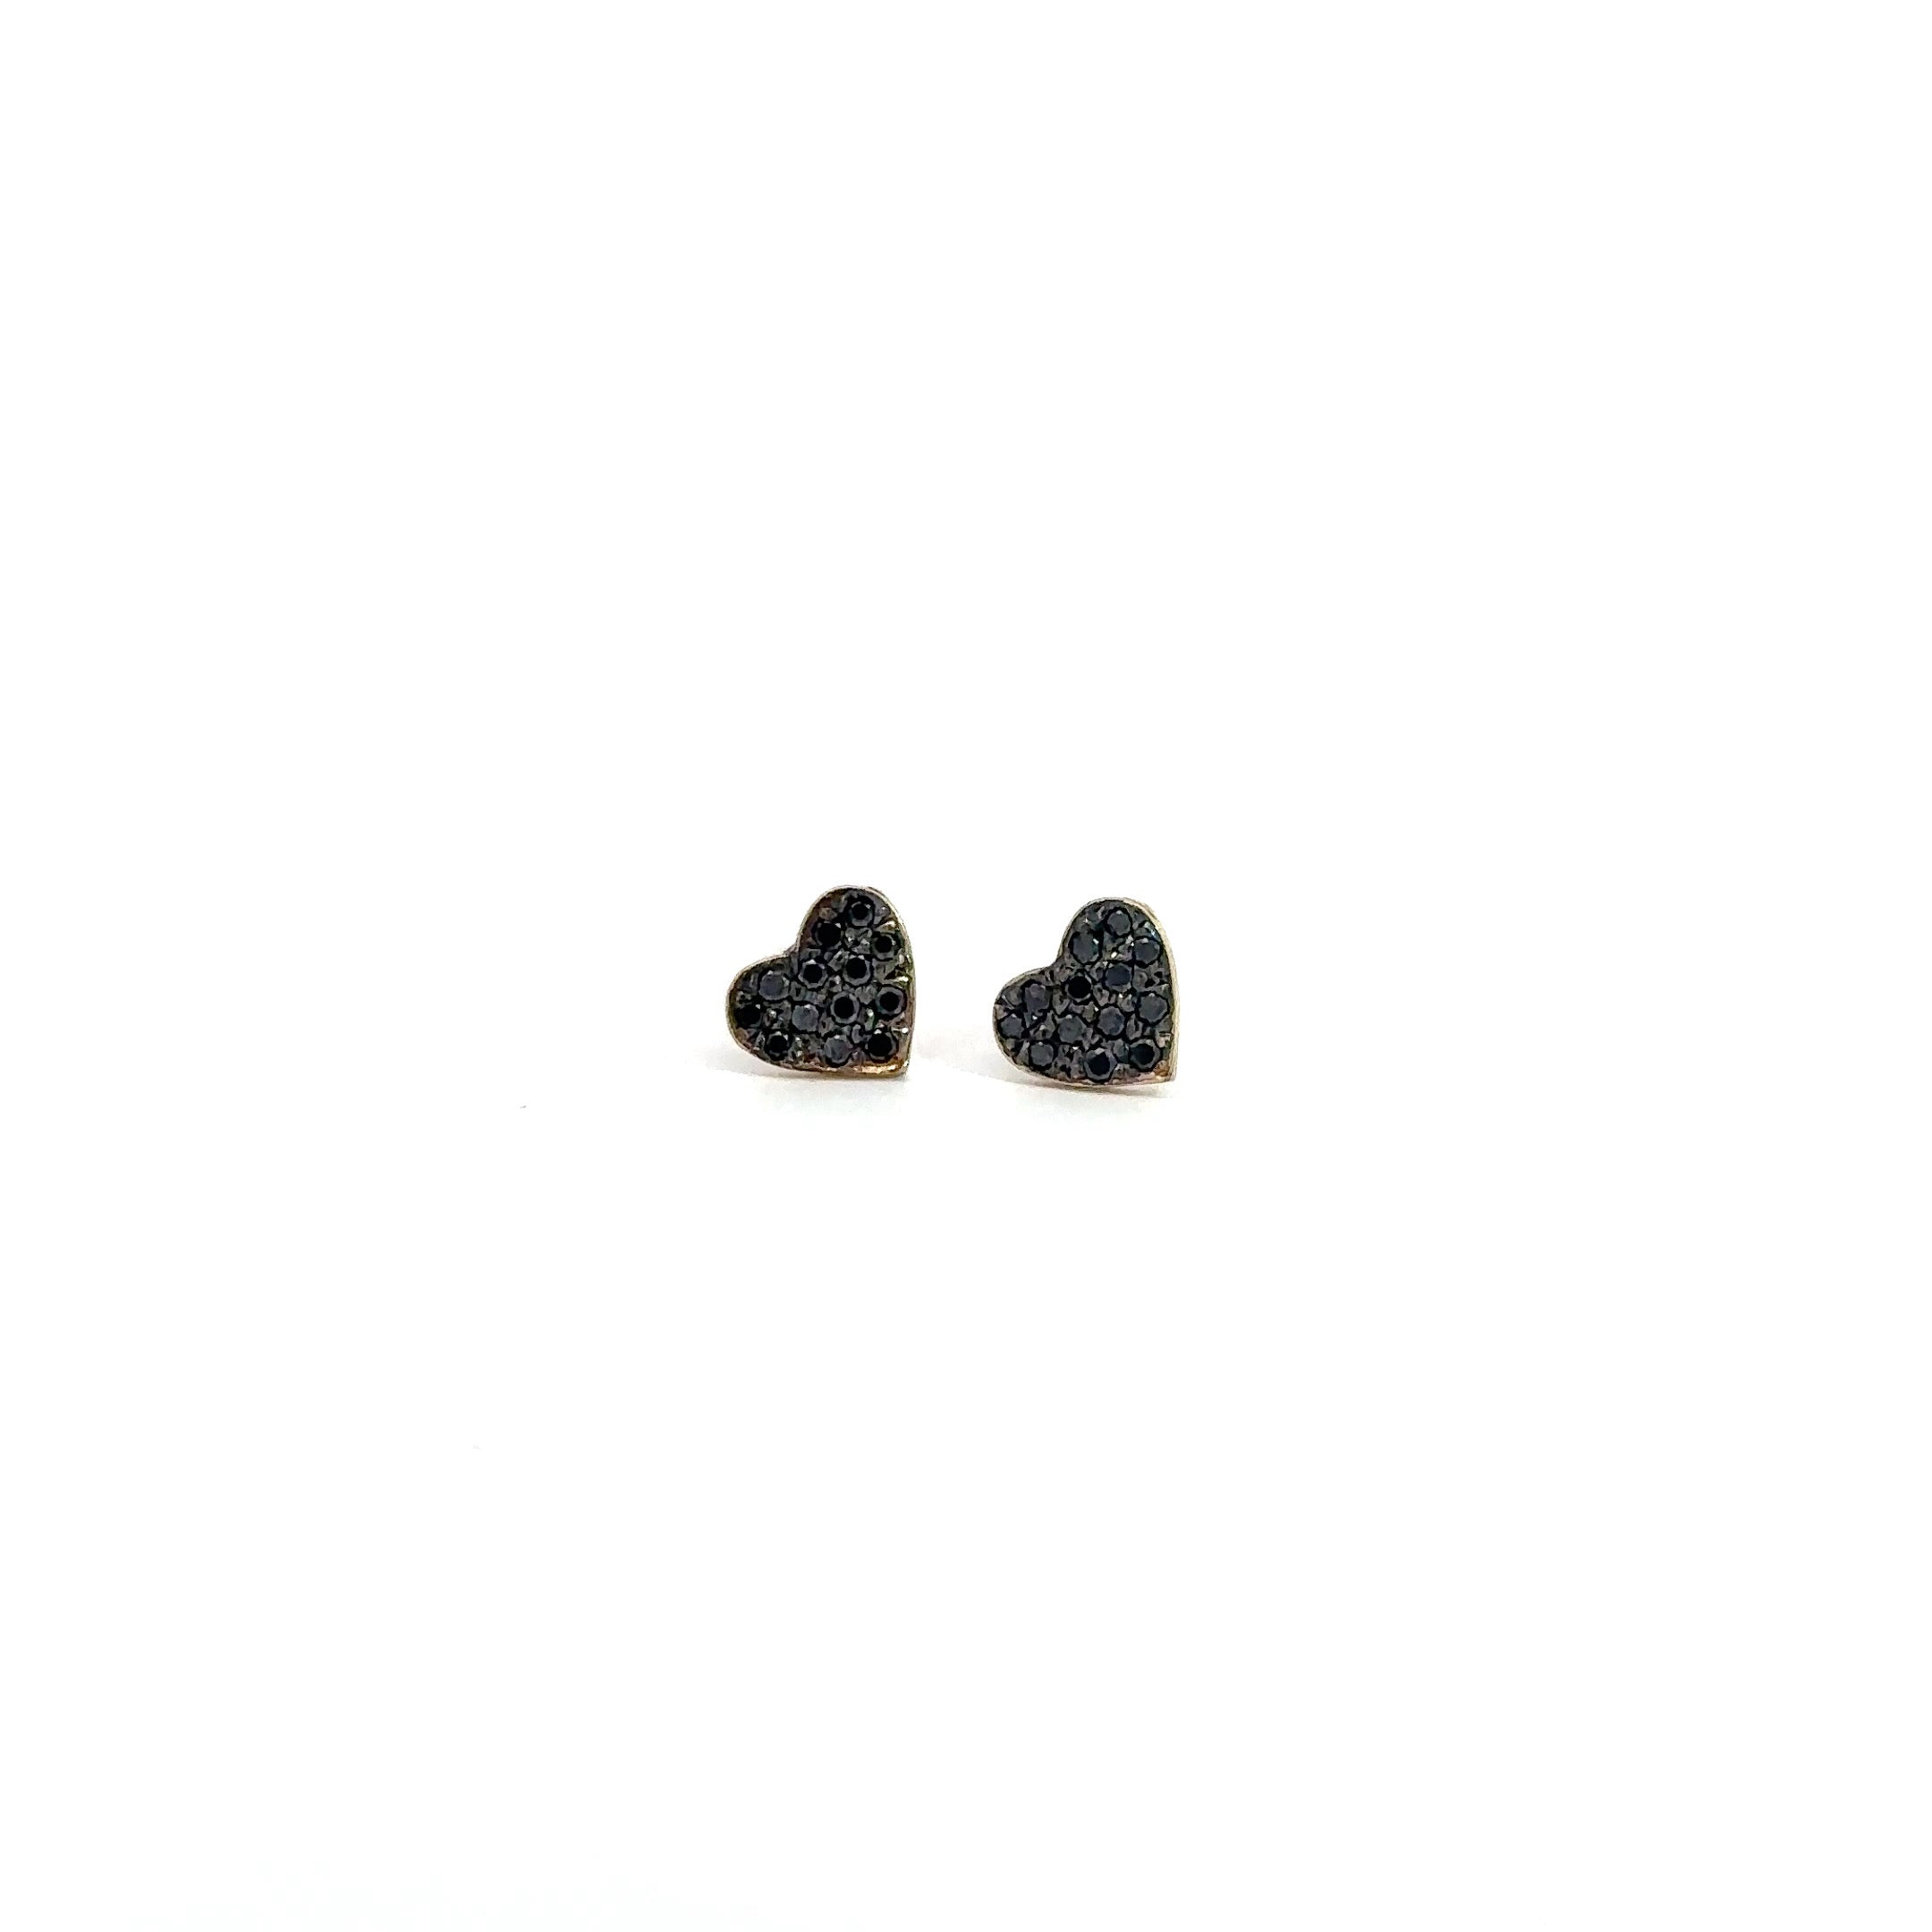 WD1234 14kt Gold Hearts with Pave Black Diamond Stud Earrings